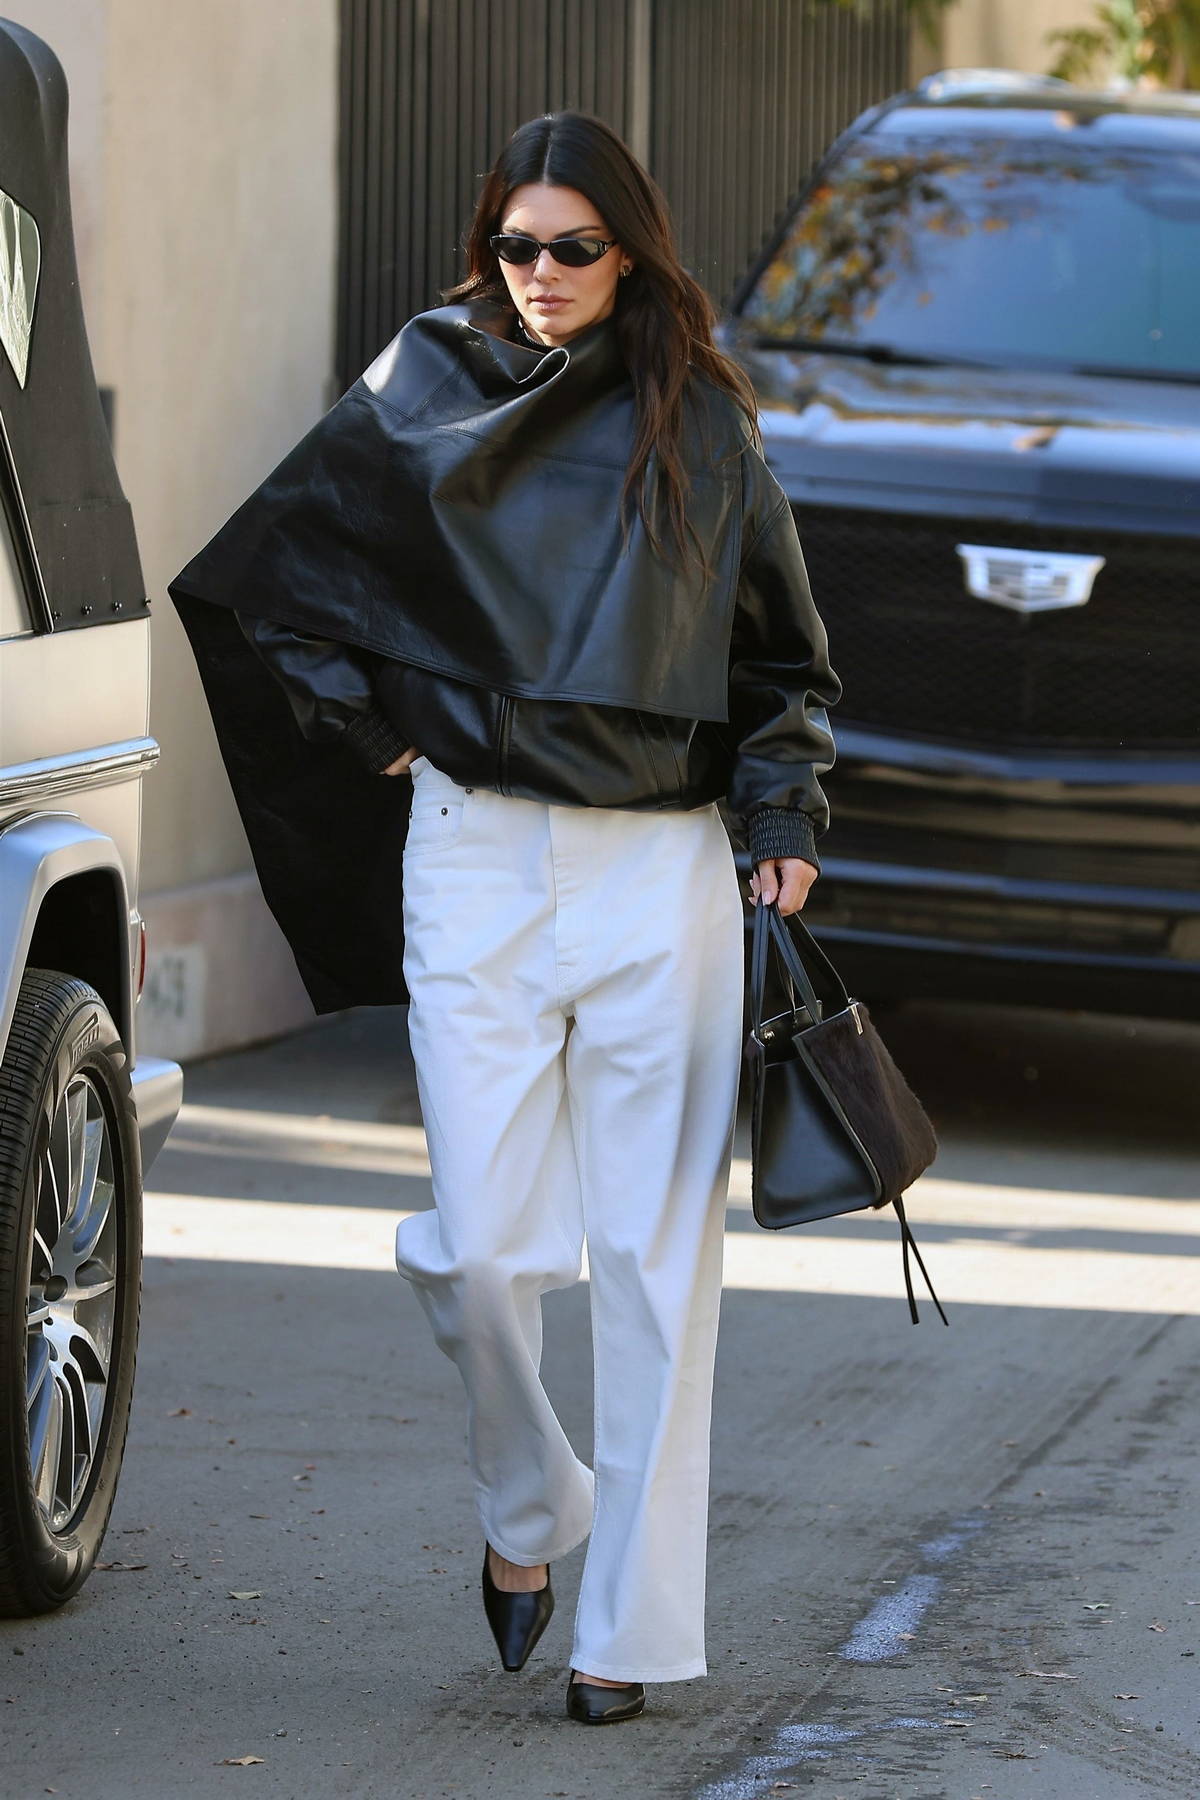 Shanina Shaik rocks black leather pants with a white tank top and